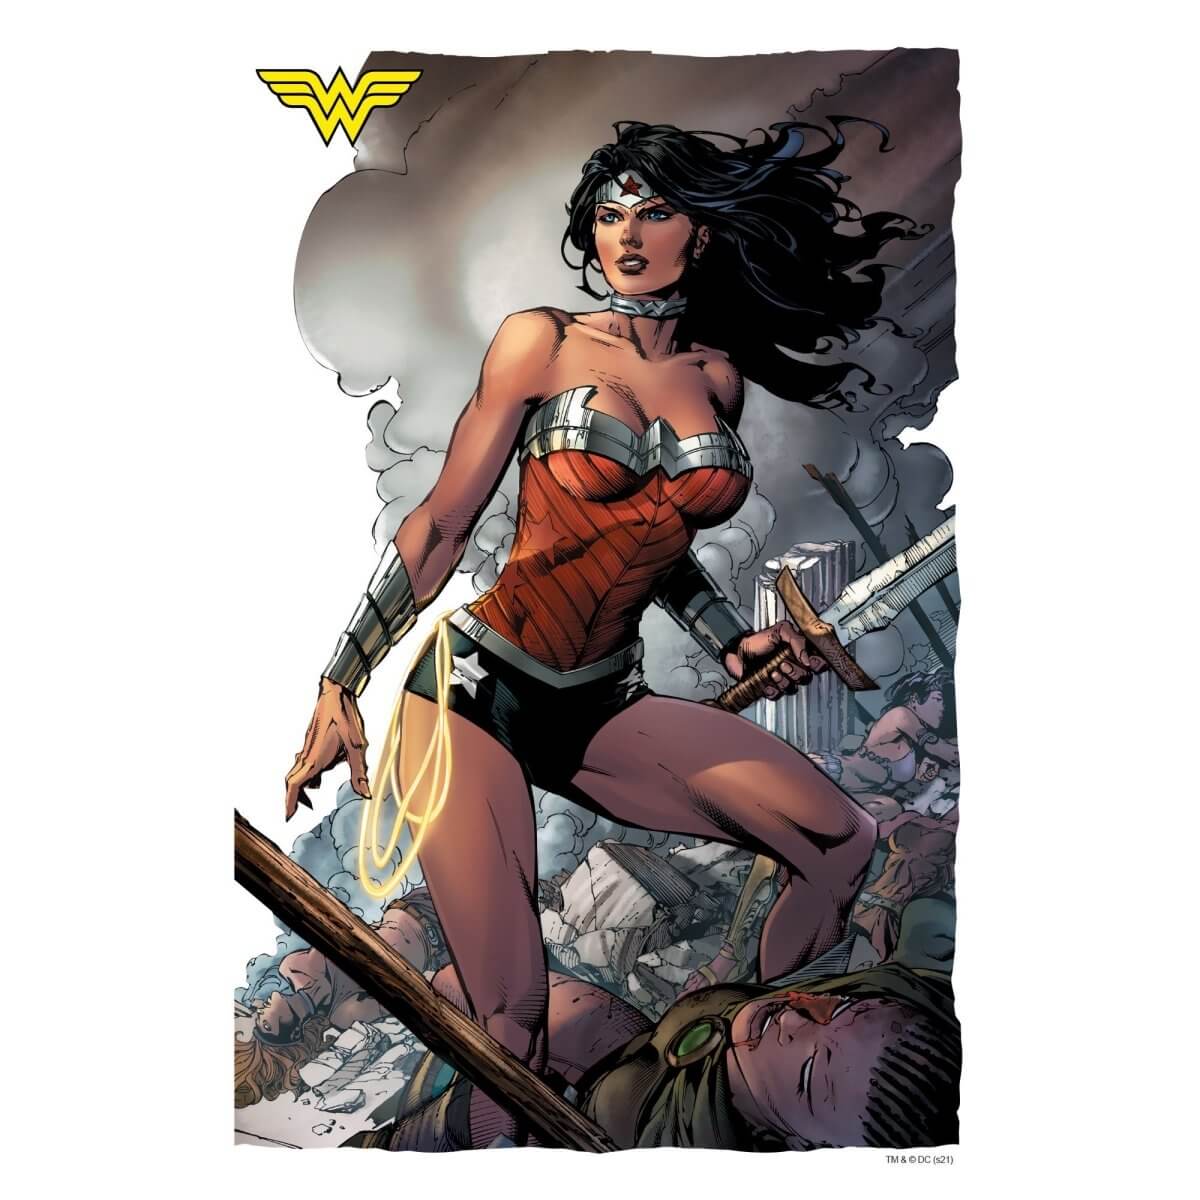 Kismet Decals Wonder Woman #38 Pg 17 Comic Cover Series Officially Licensed Wall Sticker - Easy DIY DC Comics Home, Kids or Adult Bedroom, Office, Living Room Decor Wall Art - Kismet Decals